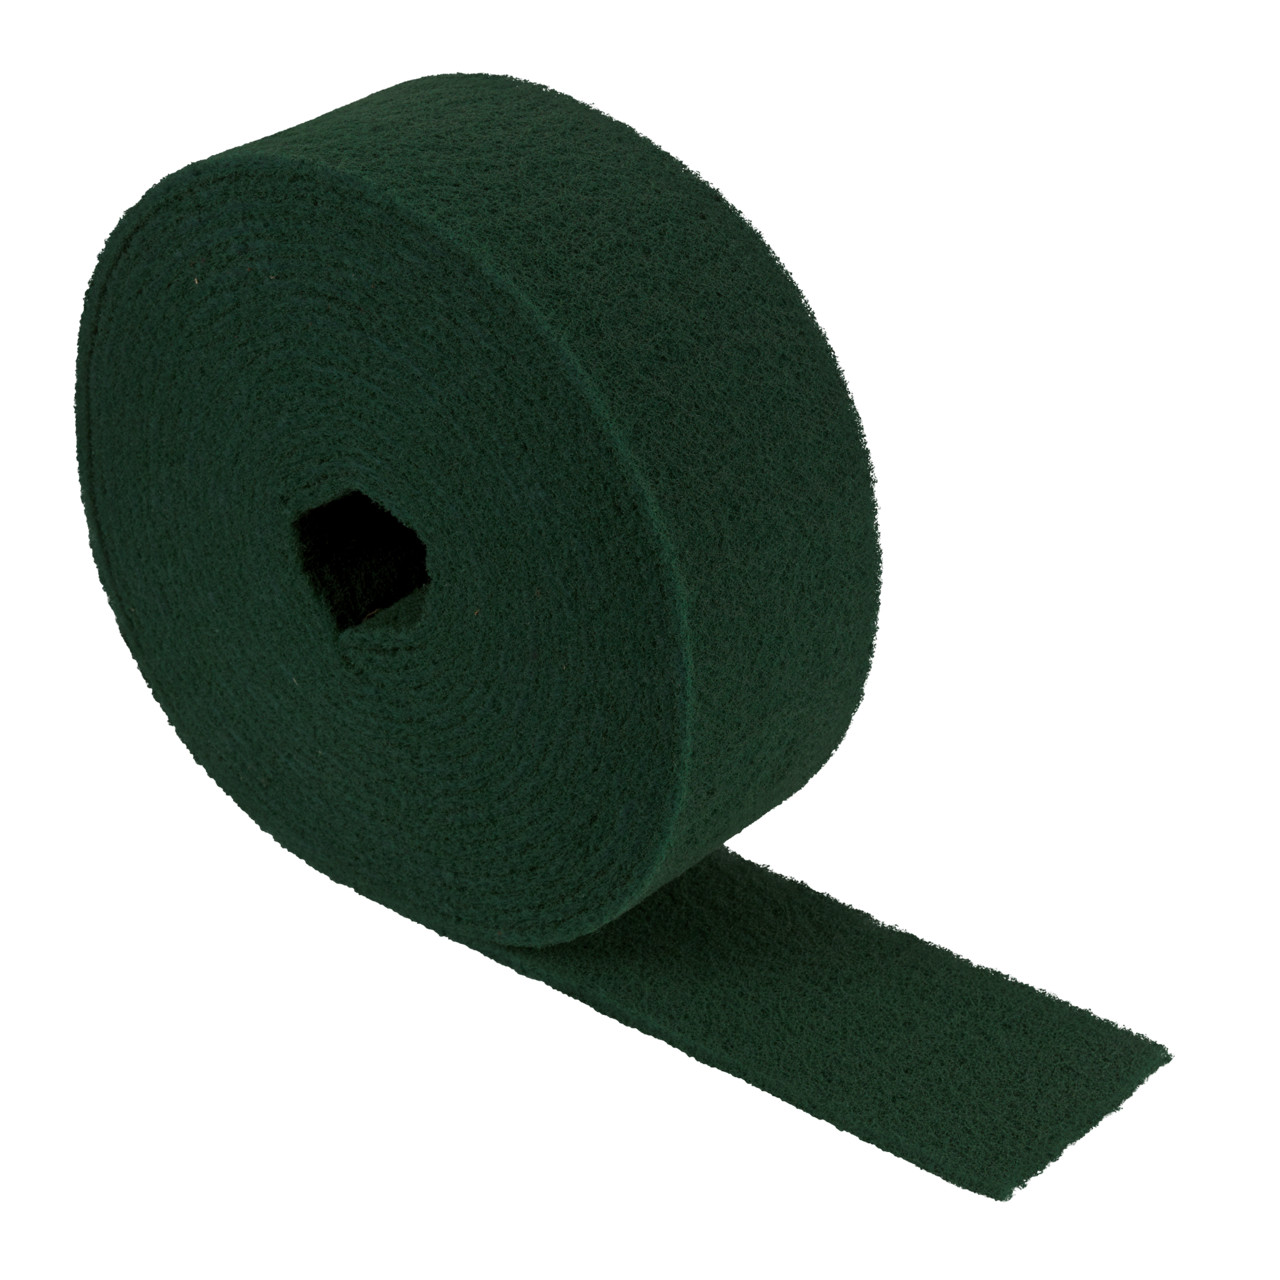 Tyrolit Non-woven rolls TxH 100x10 Universally applicable, A GP - GREEN, Corresponds to P400-500, Form: ROLL, Art. 120682